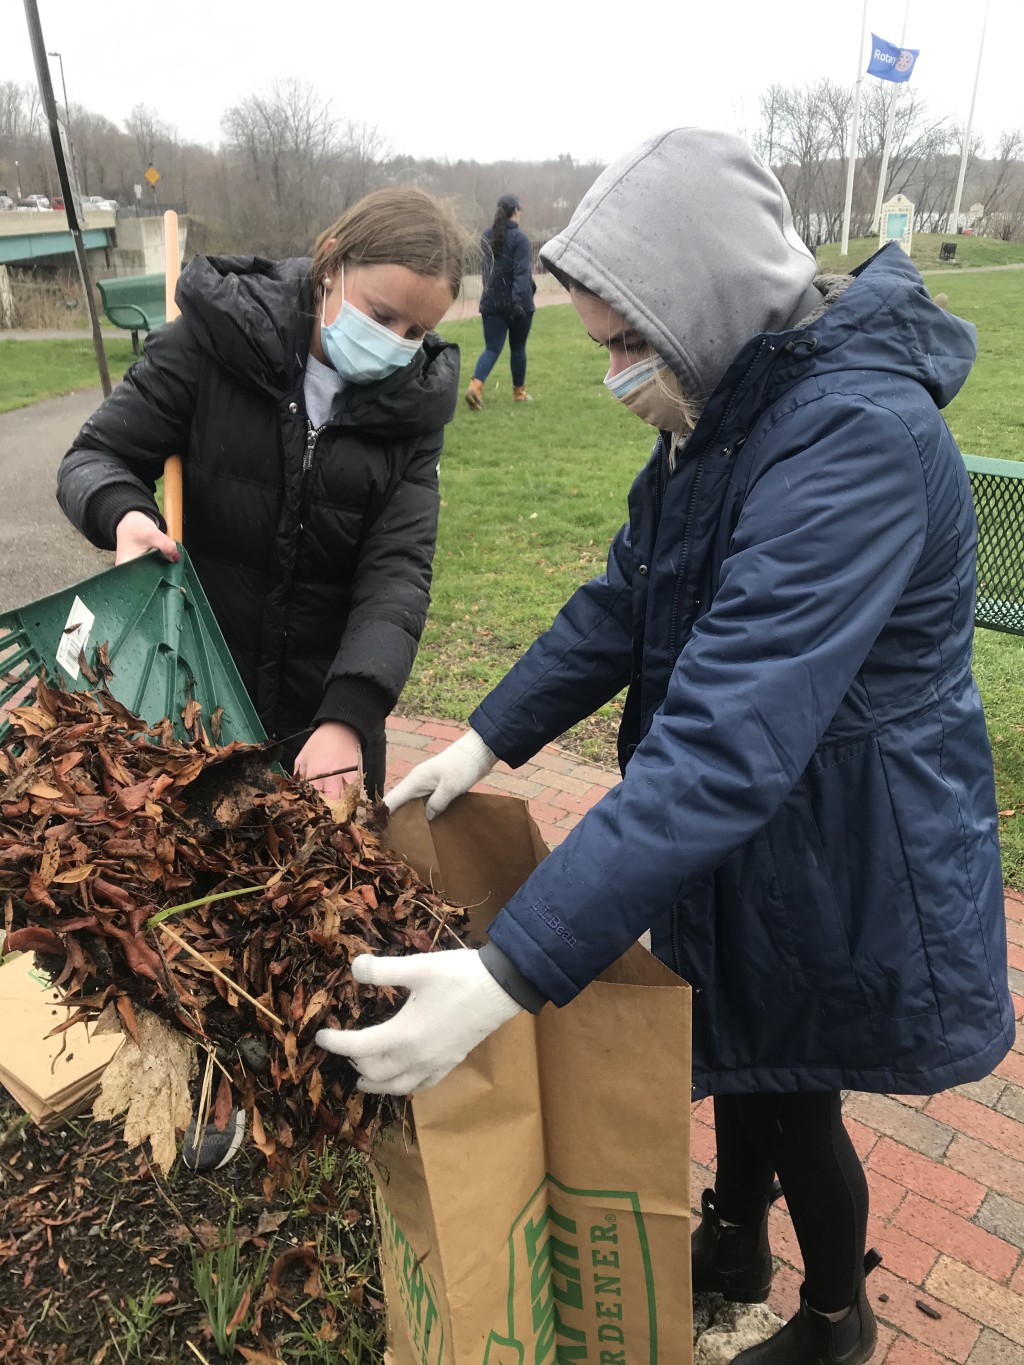 Students pick up leaves during park clean-up